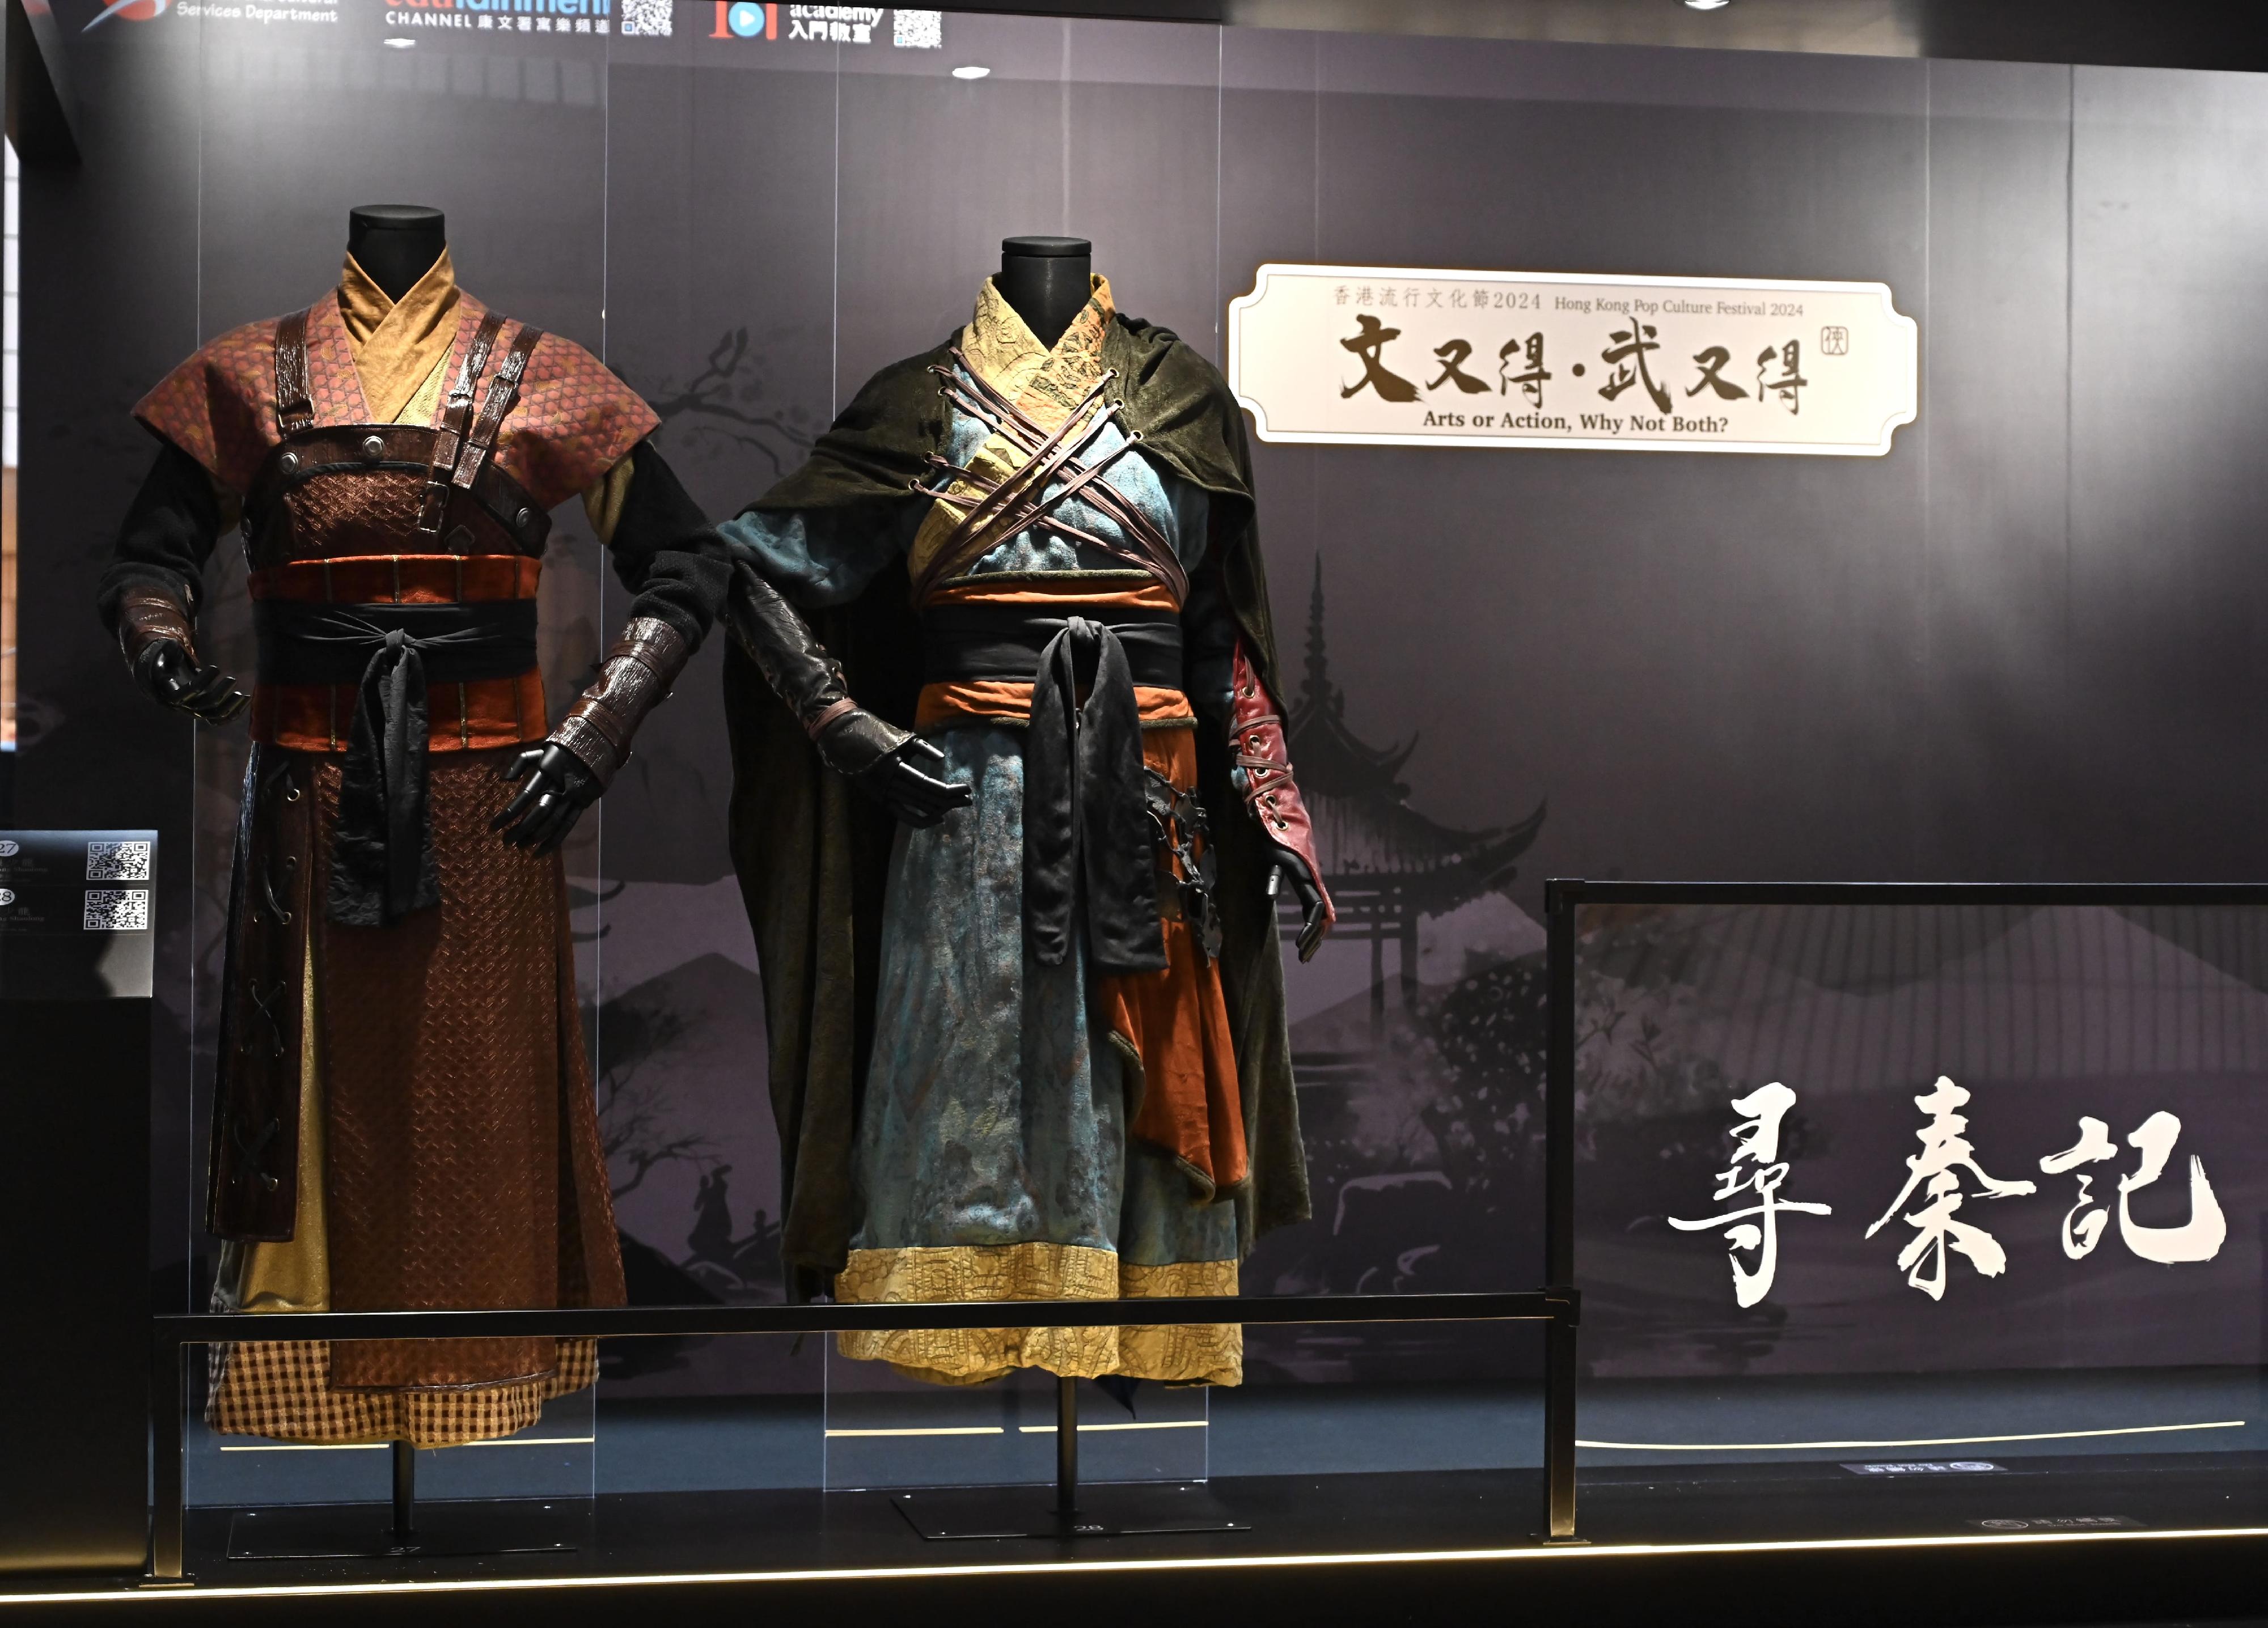 To tie in with its theme "Arts and Action", the second Hong Kong Pop Culture Festival is running a vast range of programmes inspired by martial arts novels. Among them is the "Classic Martial Arts Drama Costumes and Props Exhibition" under the "Arts or Action, Why Not Both?" series, which opened today (April 17) at the foyer of the Hong Kong Cultural Centre. Photo shows the costumes of Xiang Shaolong in "A Step into the Past".